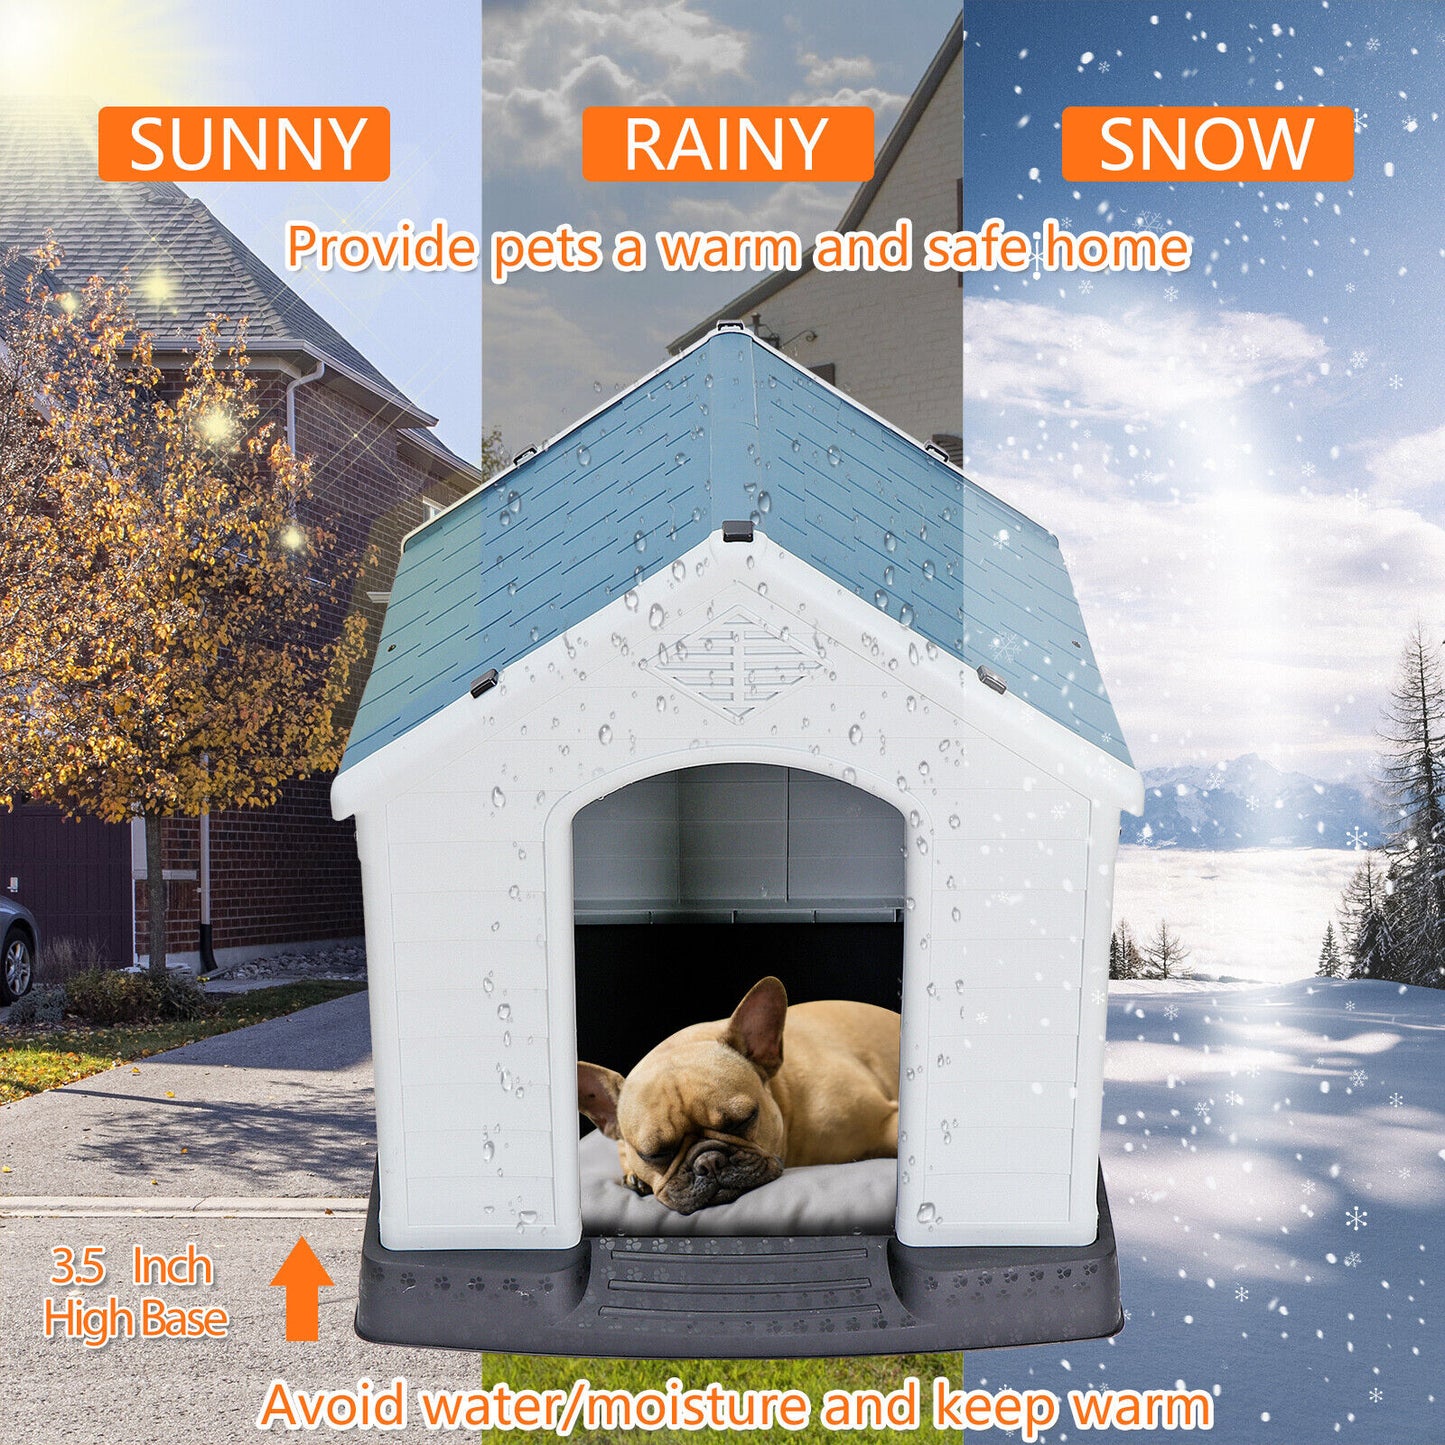 Dog House Indoor Outdoor Insulated Durable Plastic Dog House Weather White